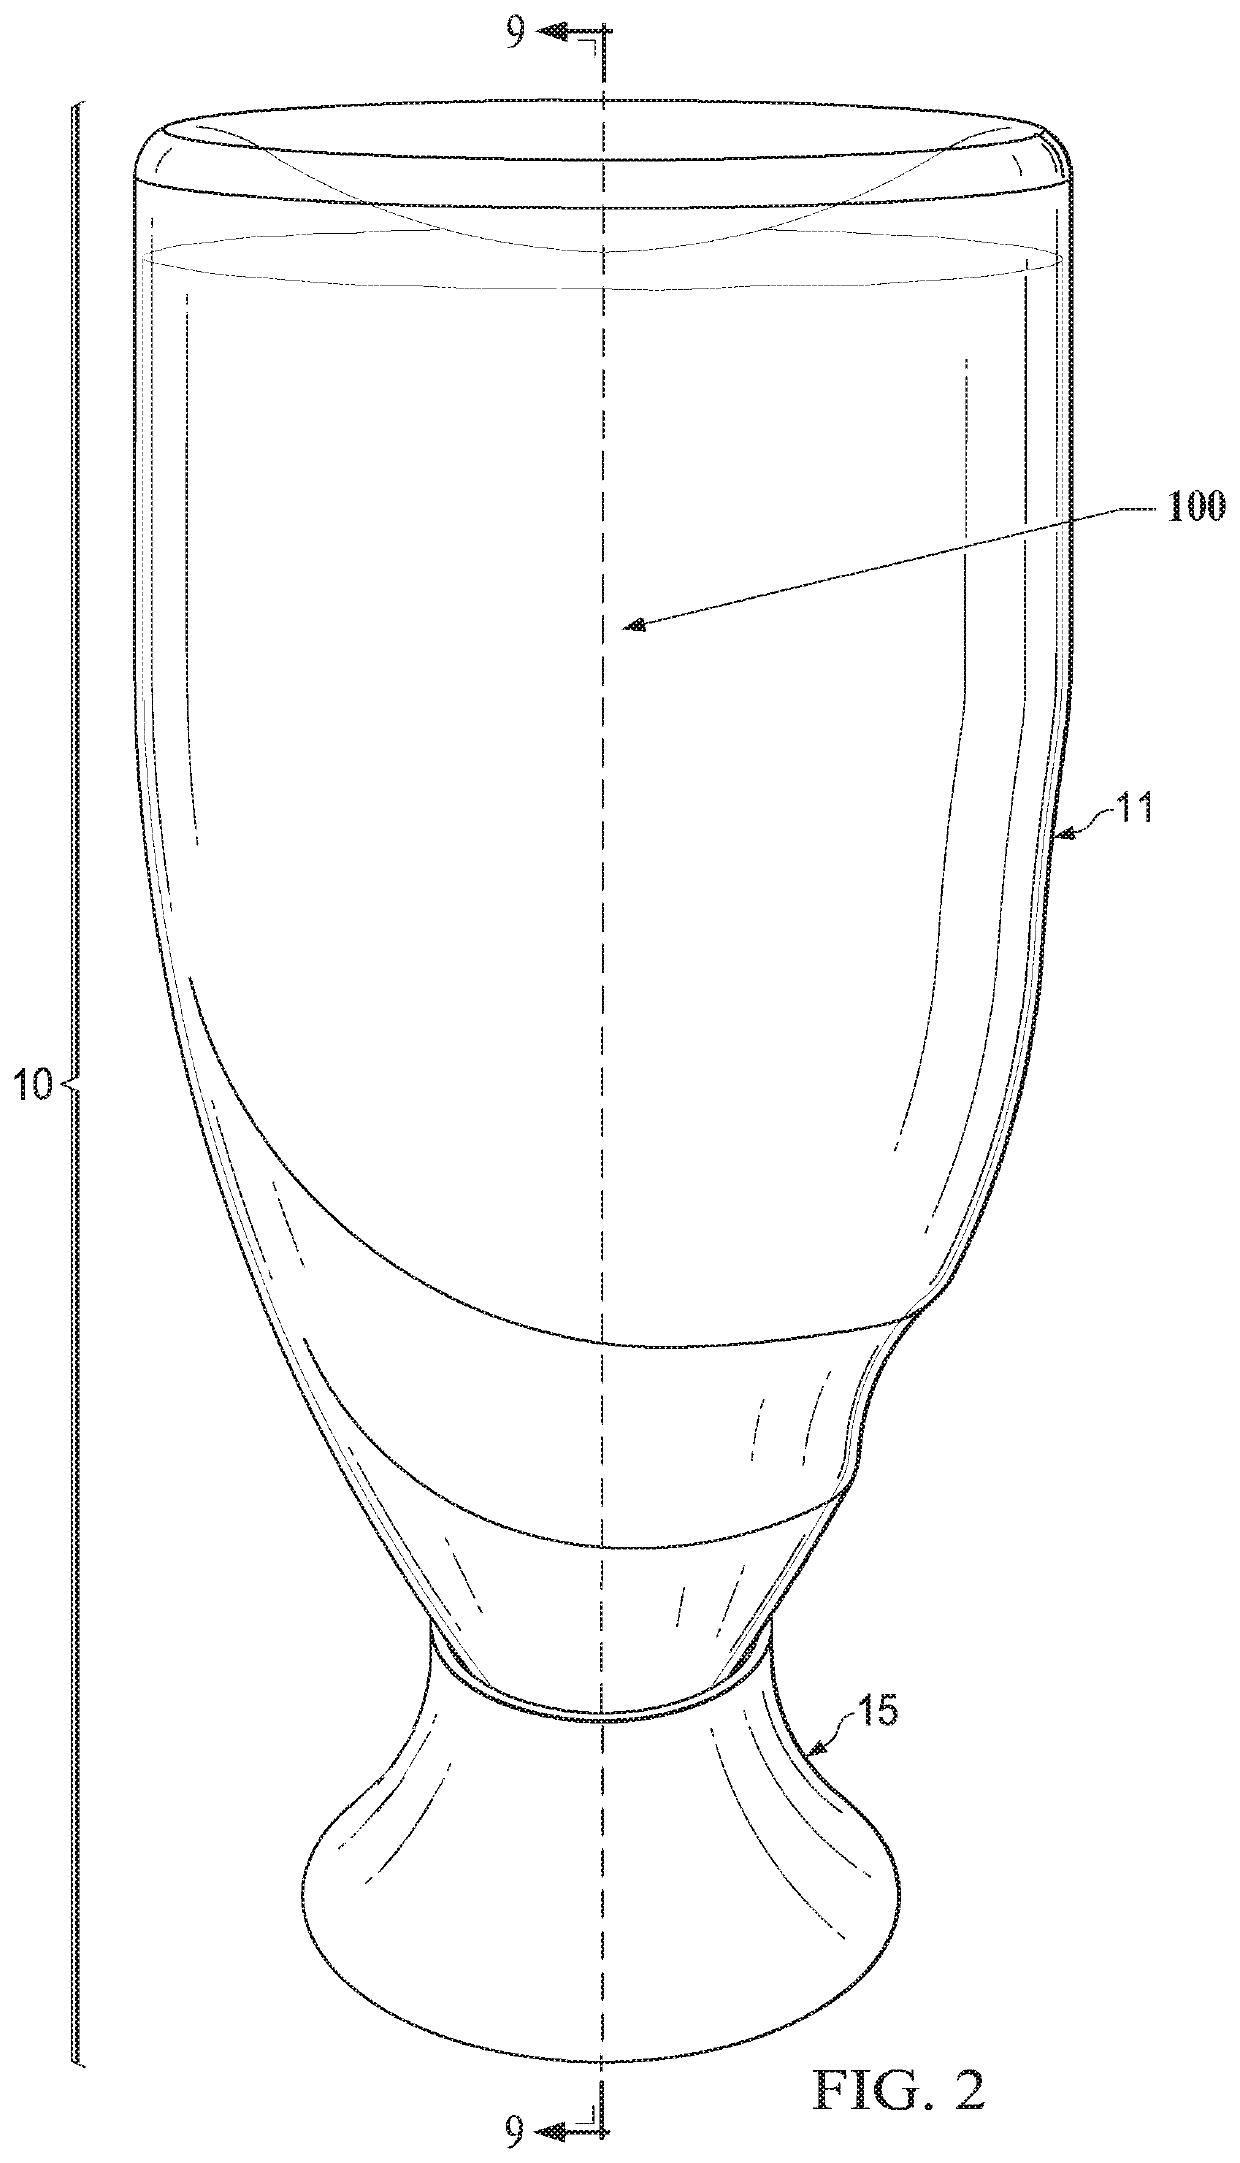 Cleaning product comprising an inverted container assembly and a viscoelastic cleaning composition